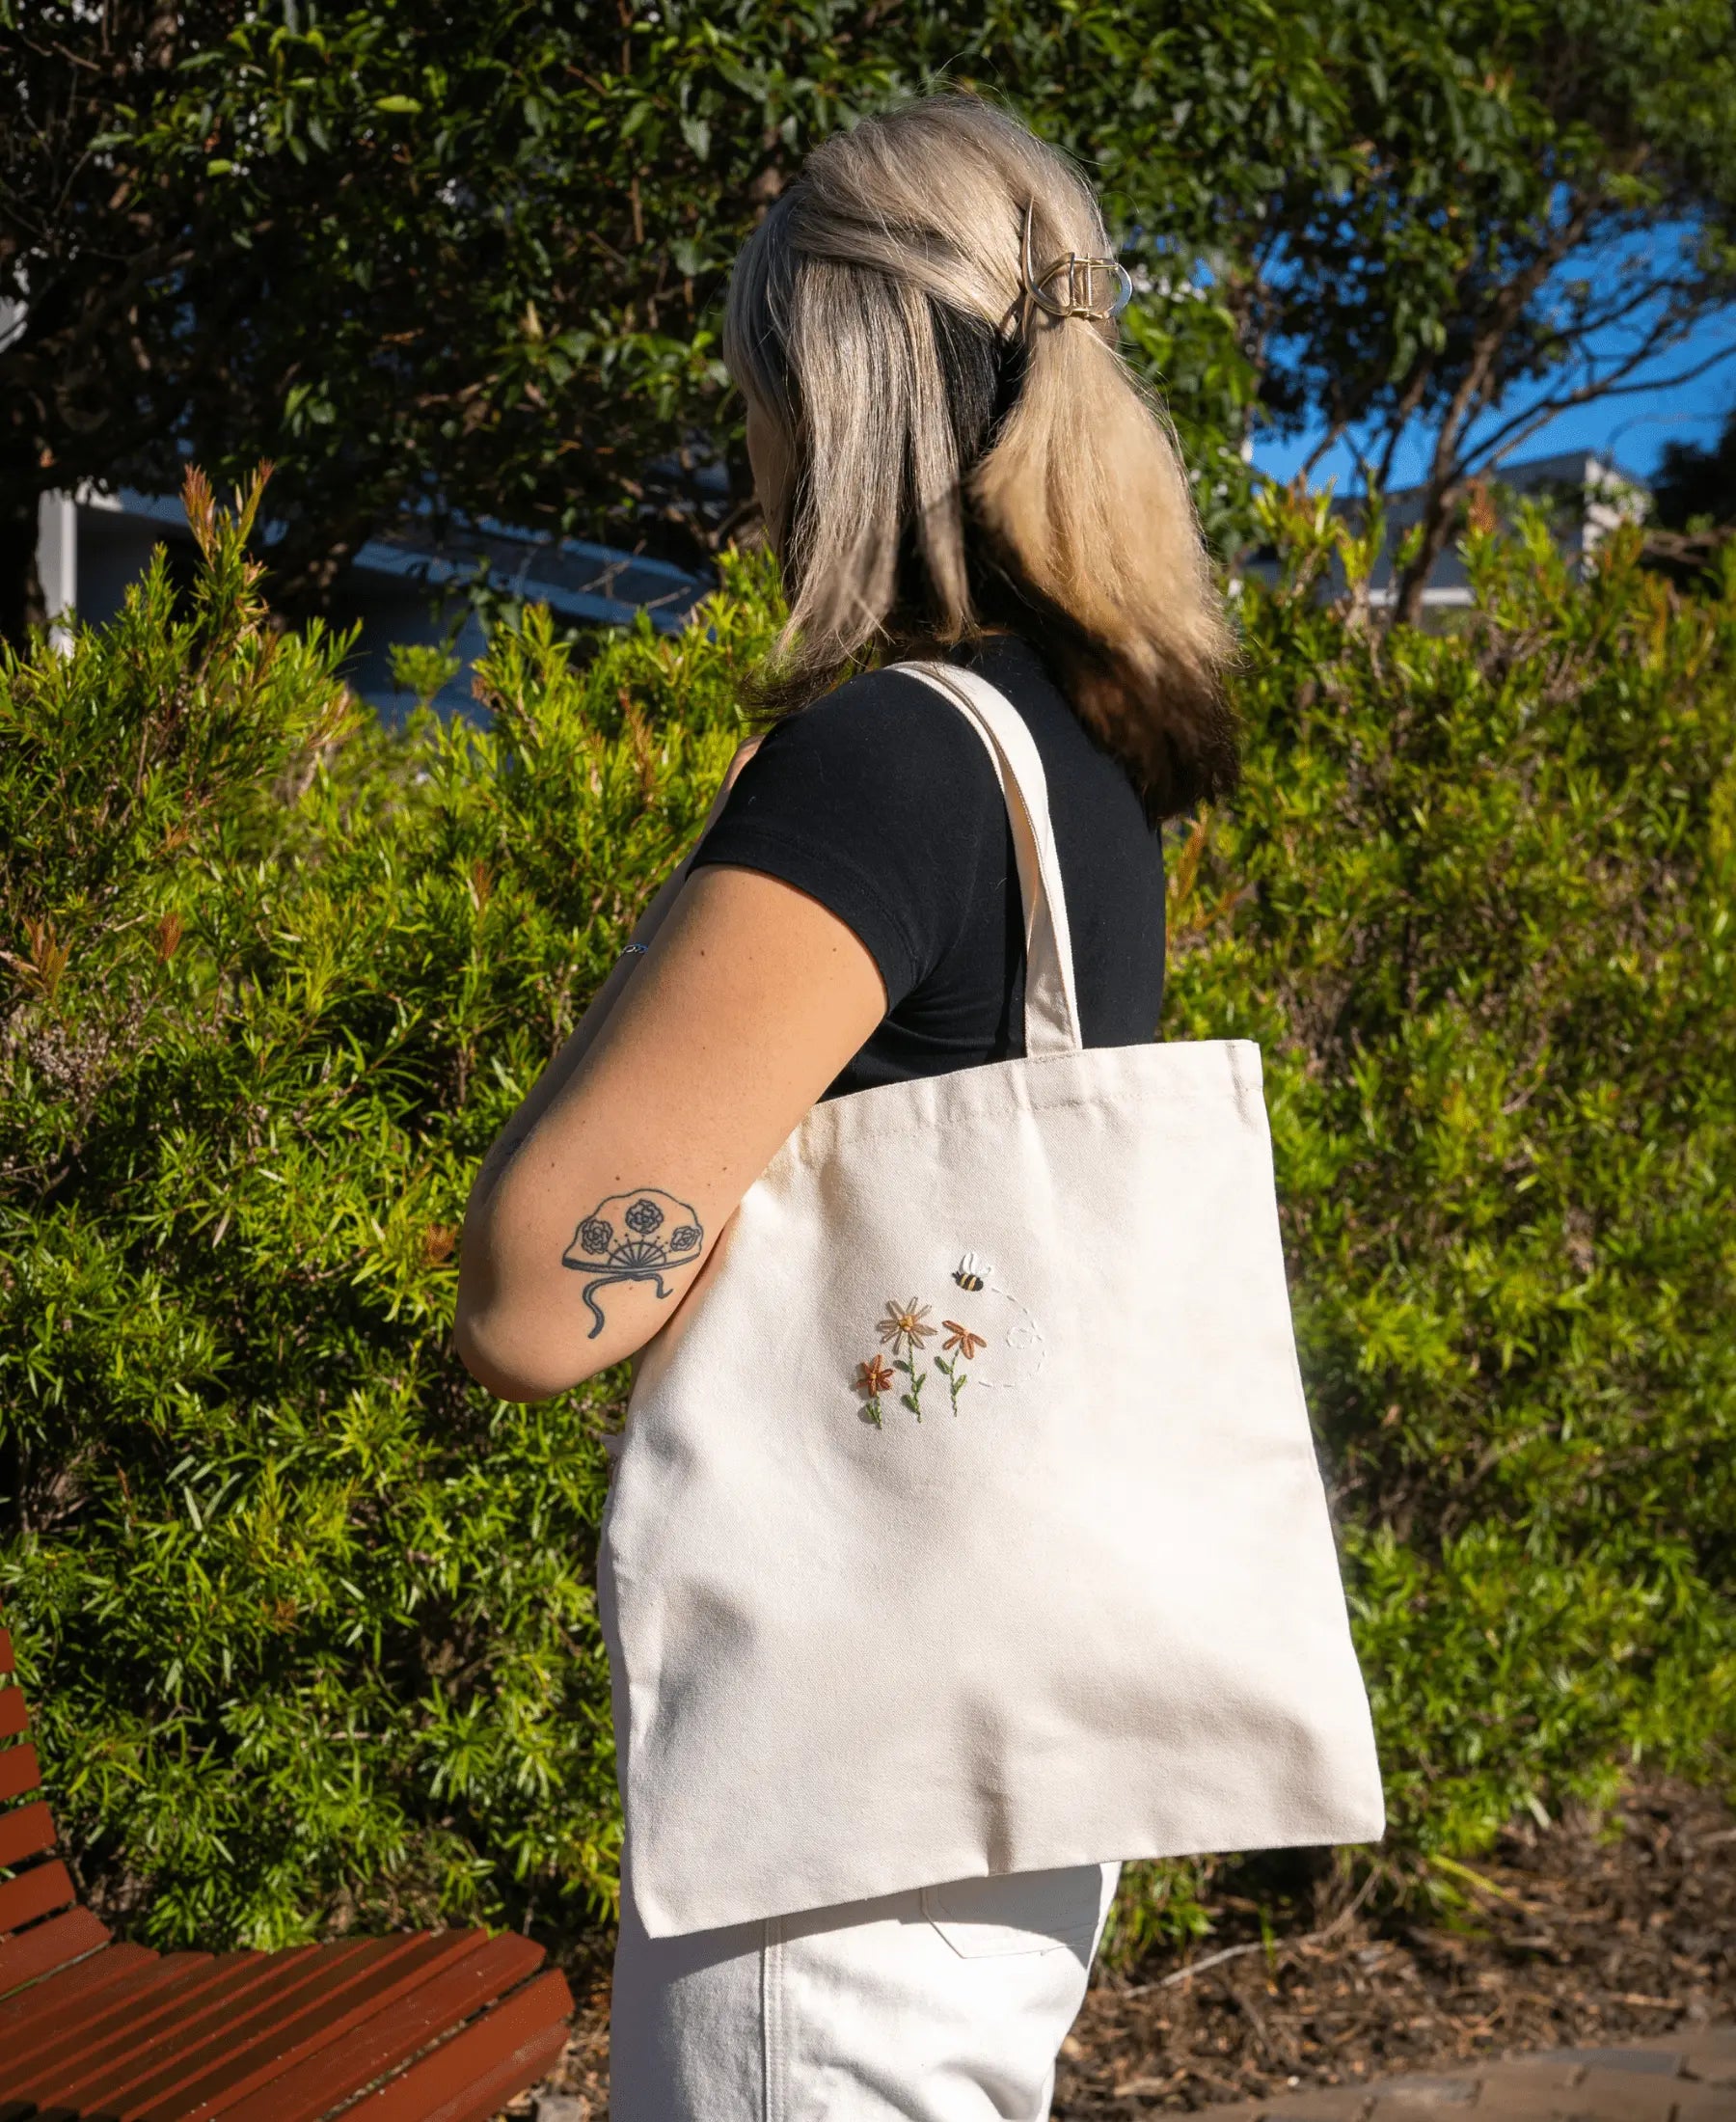 Craft Club Co Australia EASY BREEZY BLOOMS Embroidered Tote Bag Kit